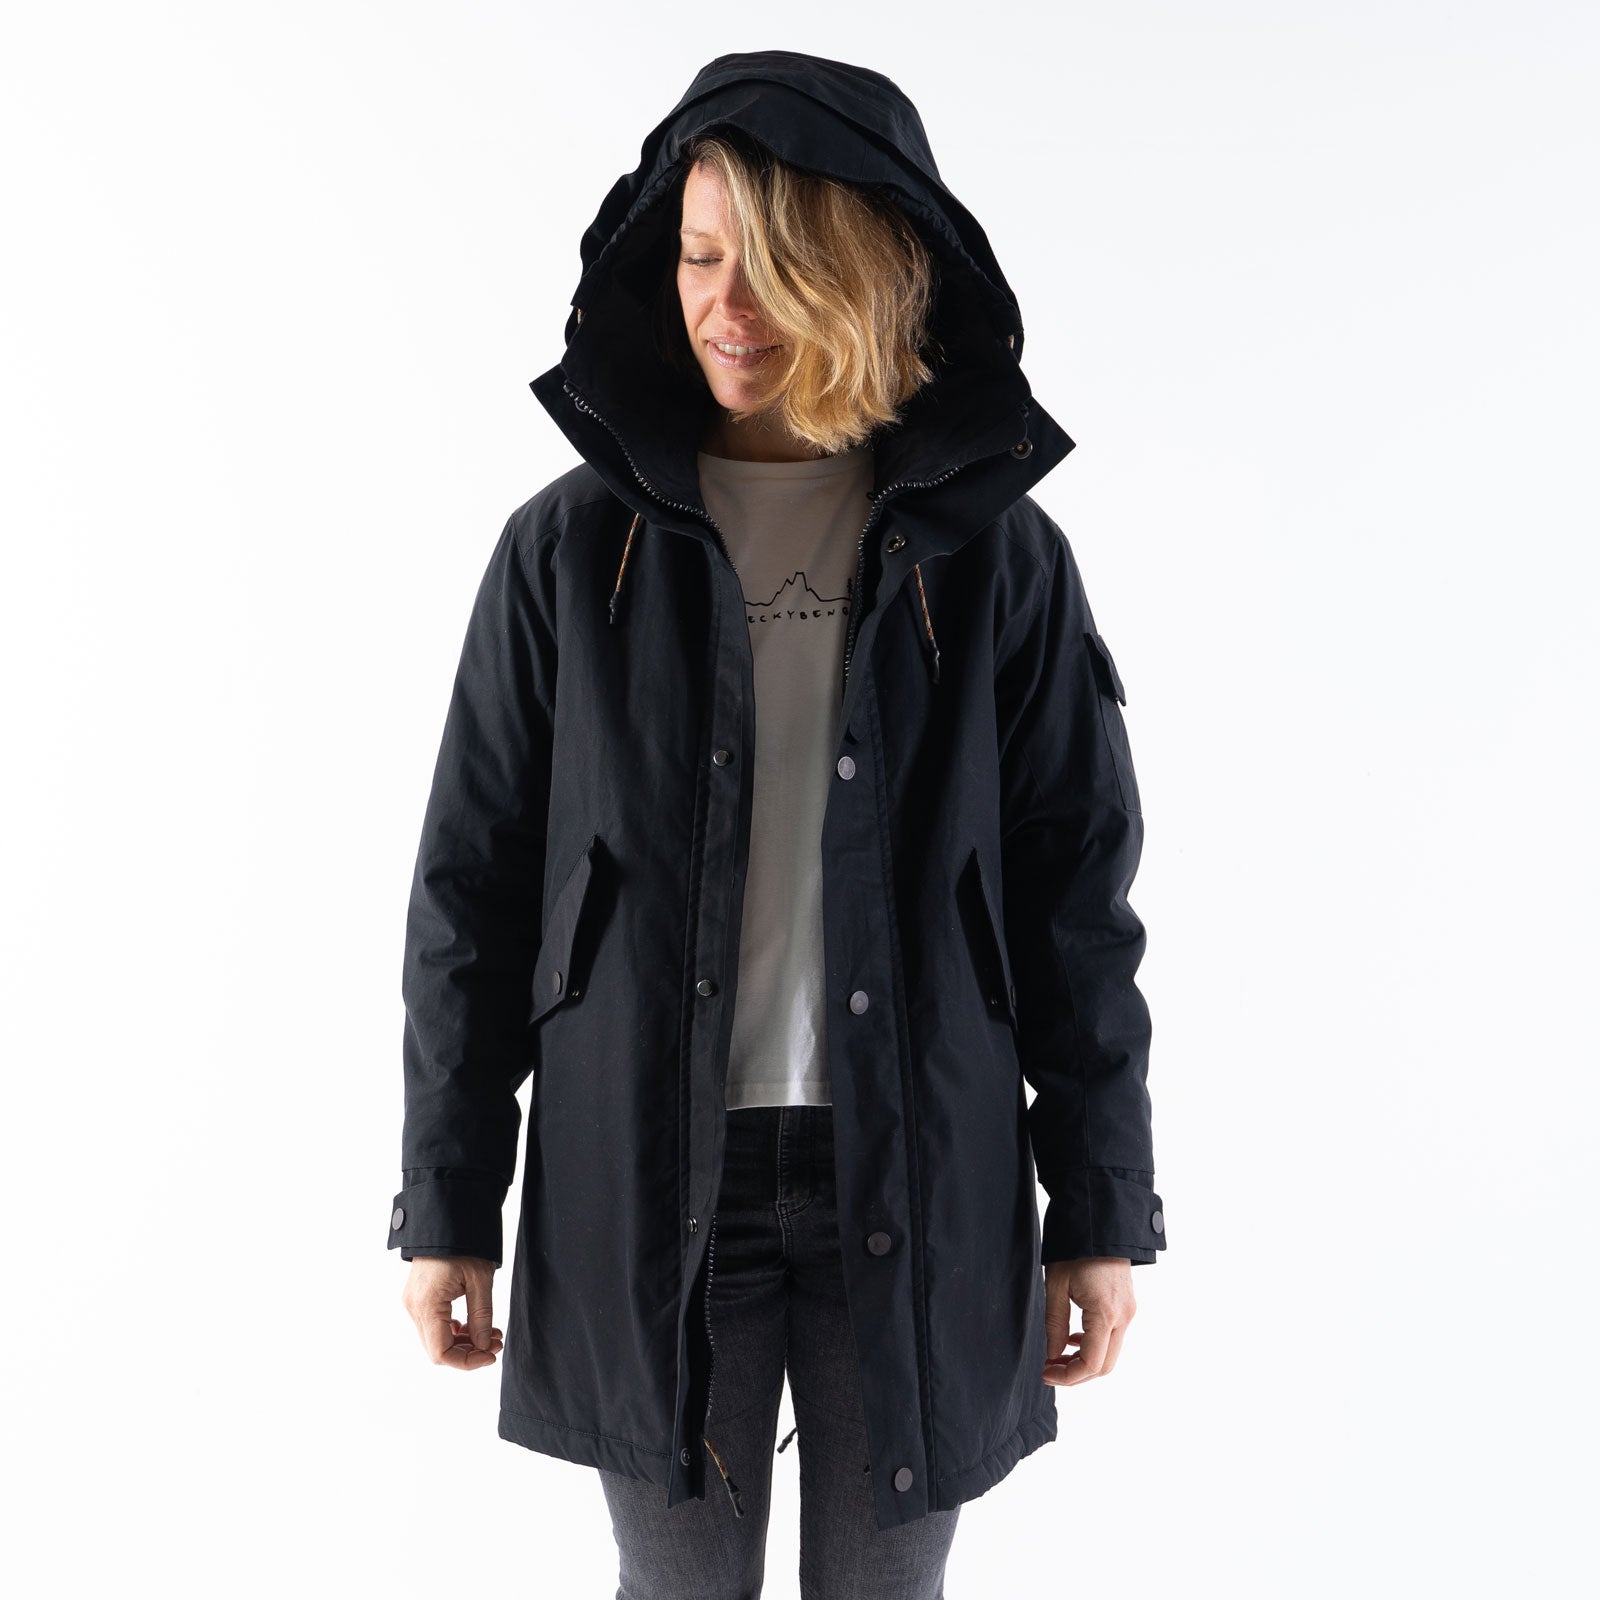 The WINTER JACKET (discontinued model)